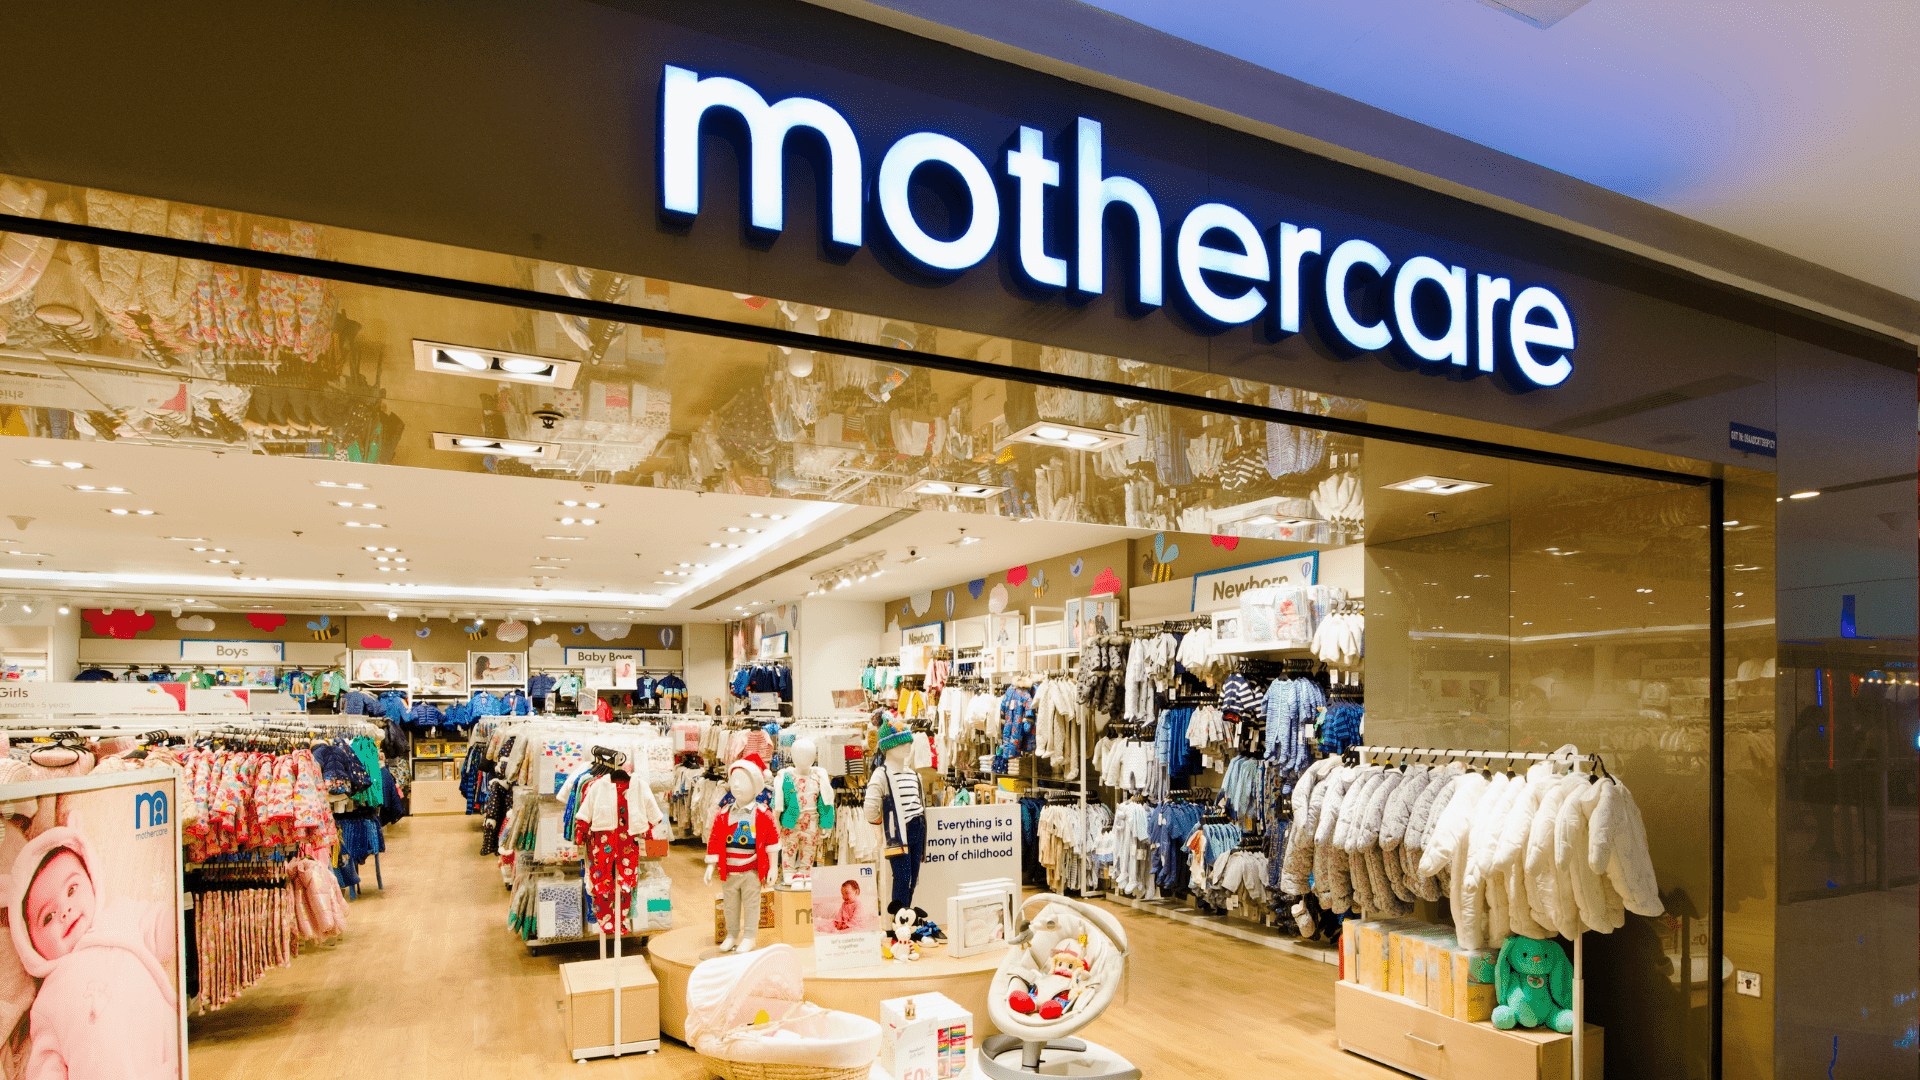 https://www.dlfmallofindia.com/Assets/stores/mother-care.png